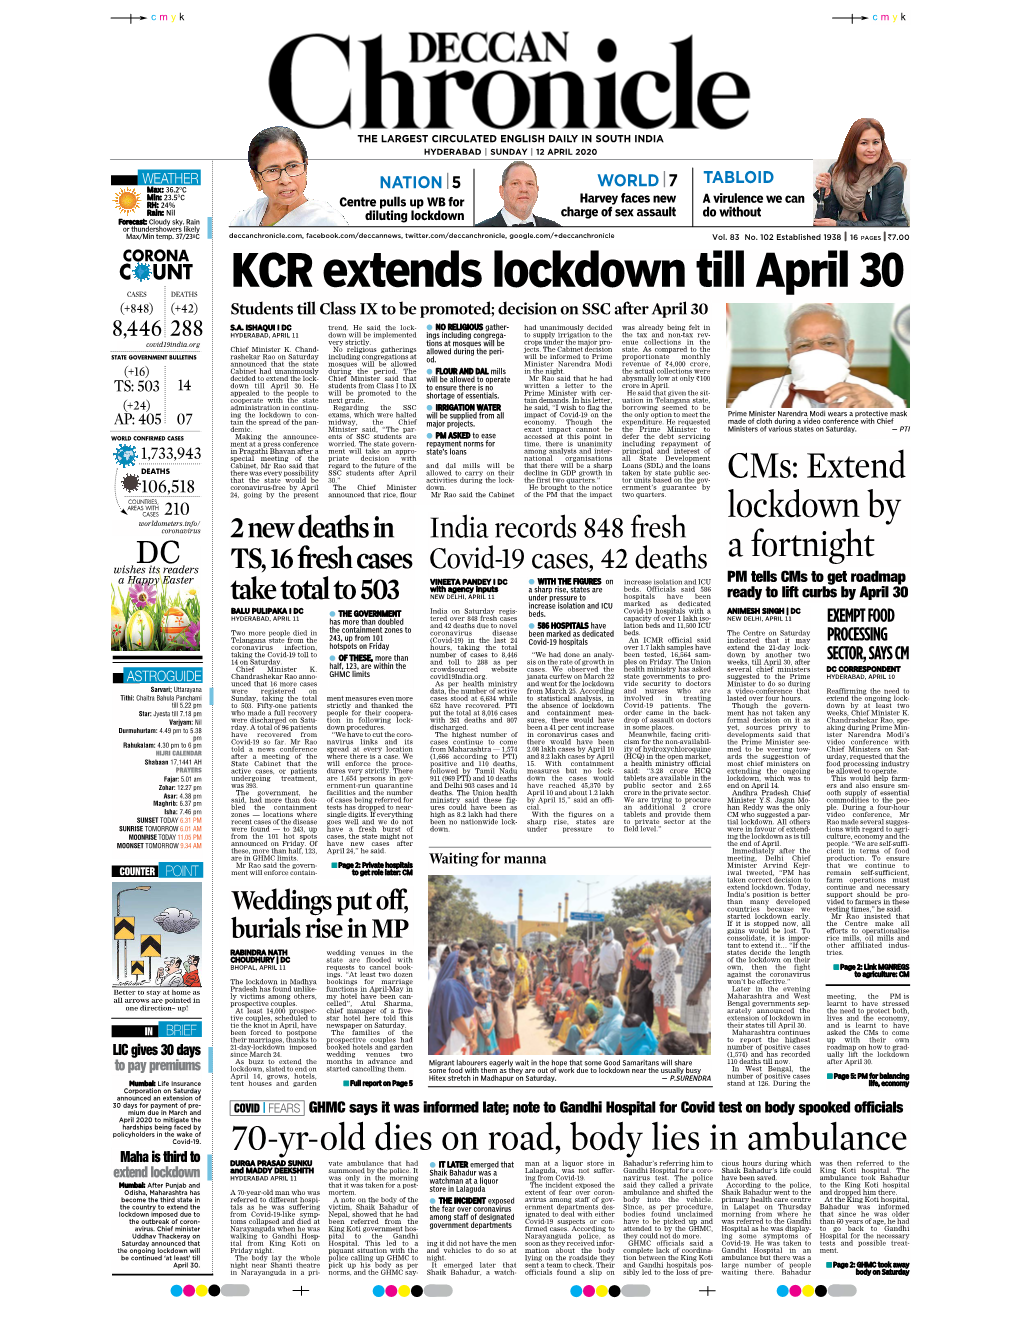 KCR Extends Lockdown Till April 30 CASES DEATHS (+848) (+42) Students Till Class IX to Be Promoted; Decision on SSC After April 30 S.A